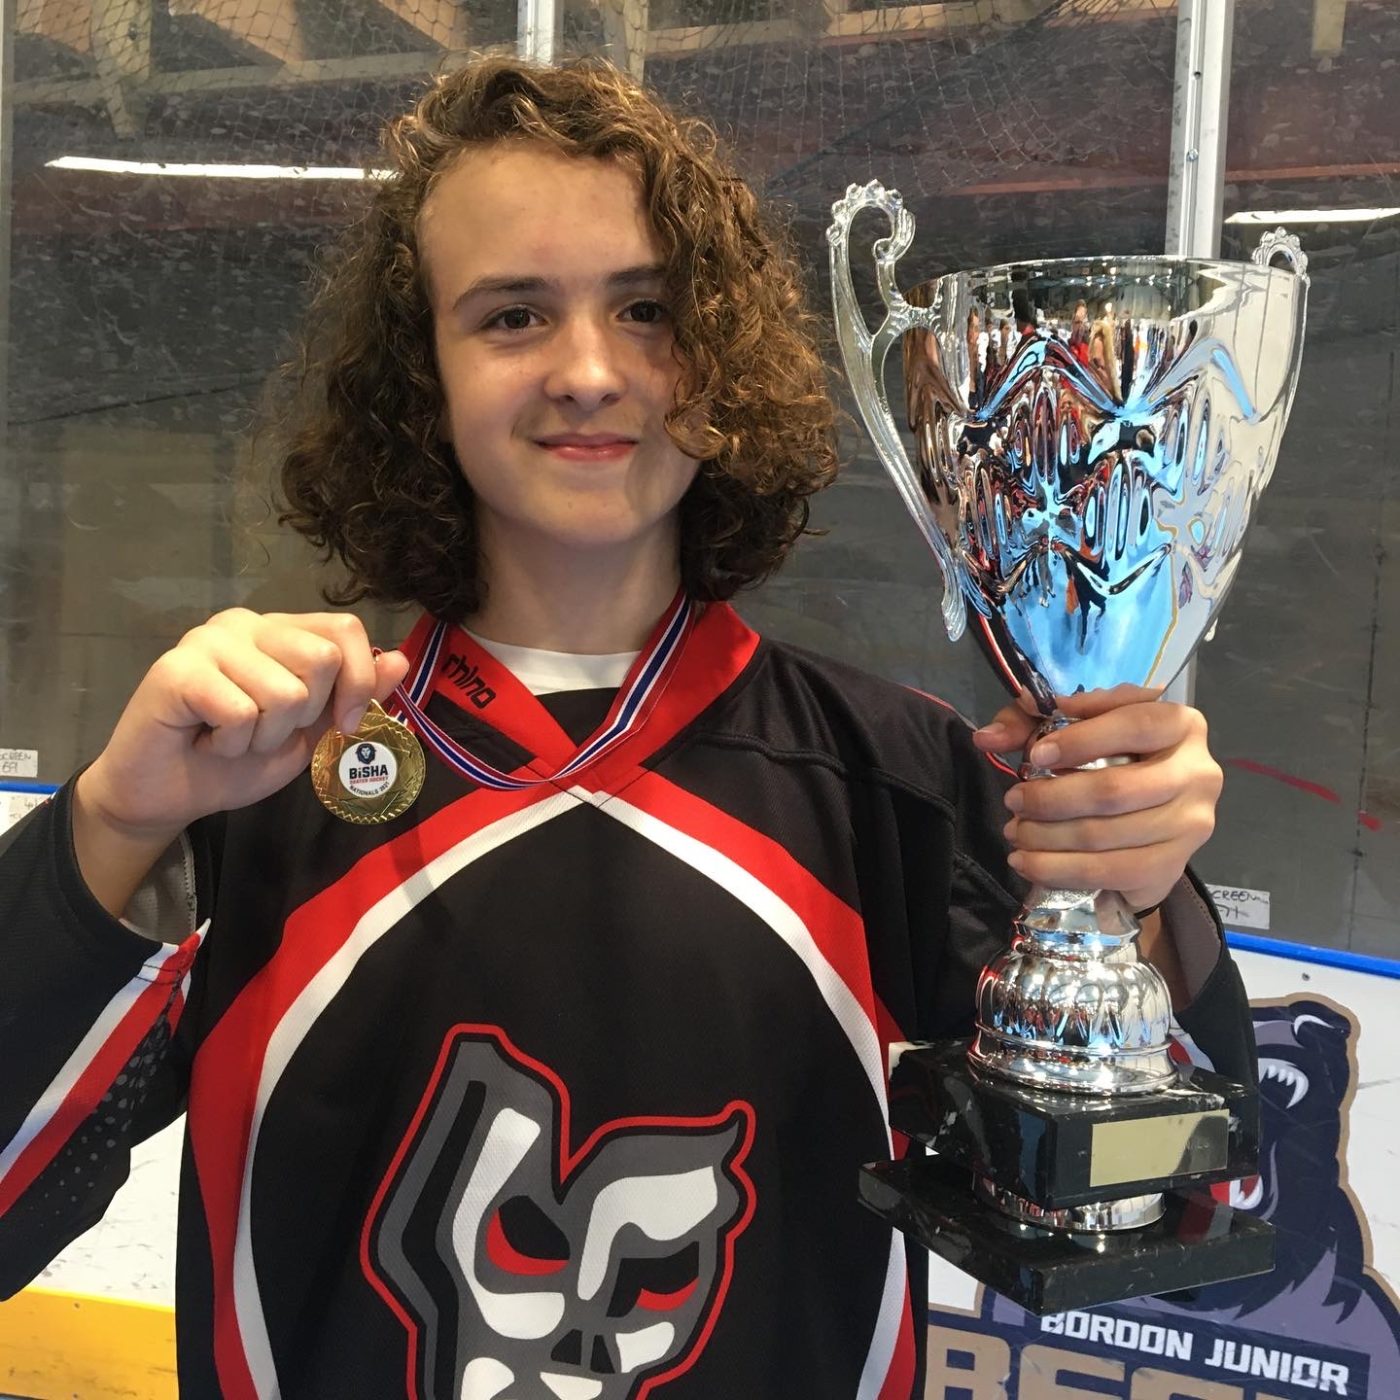 Photo of Daniel Alabaster from Year 10, holding up his U19 Roller Hockey National Finals medal and trophy for the camera.